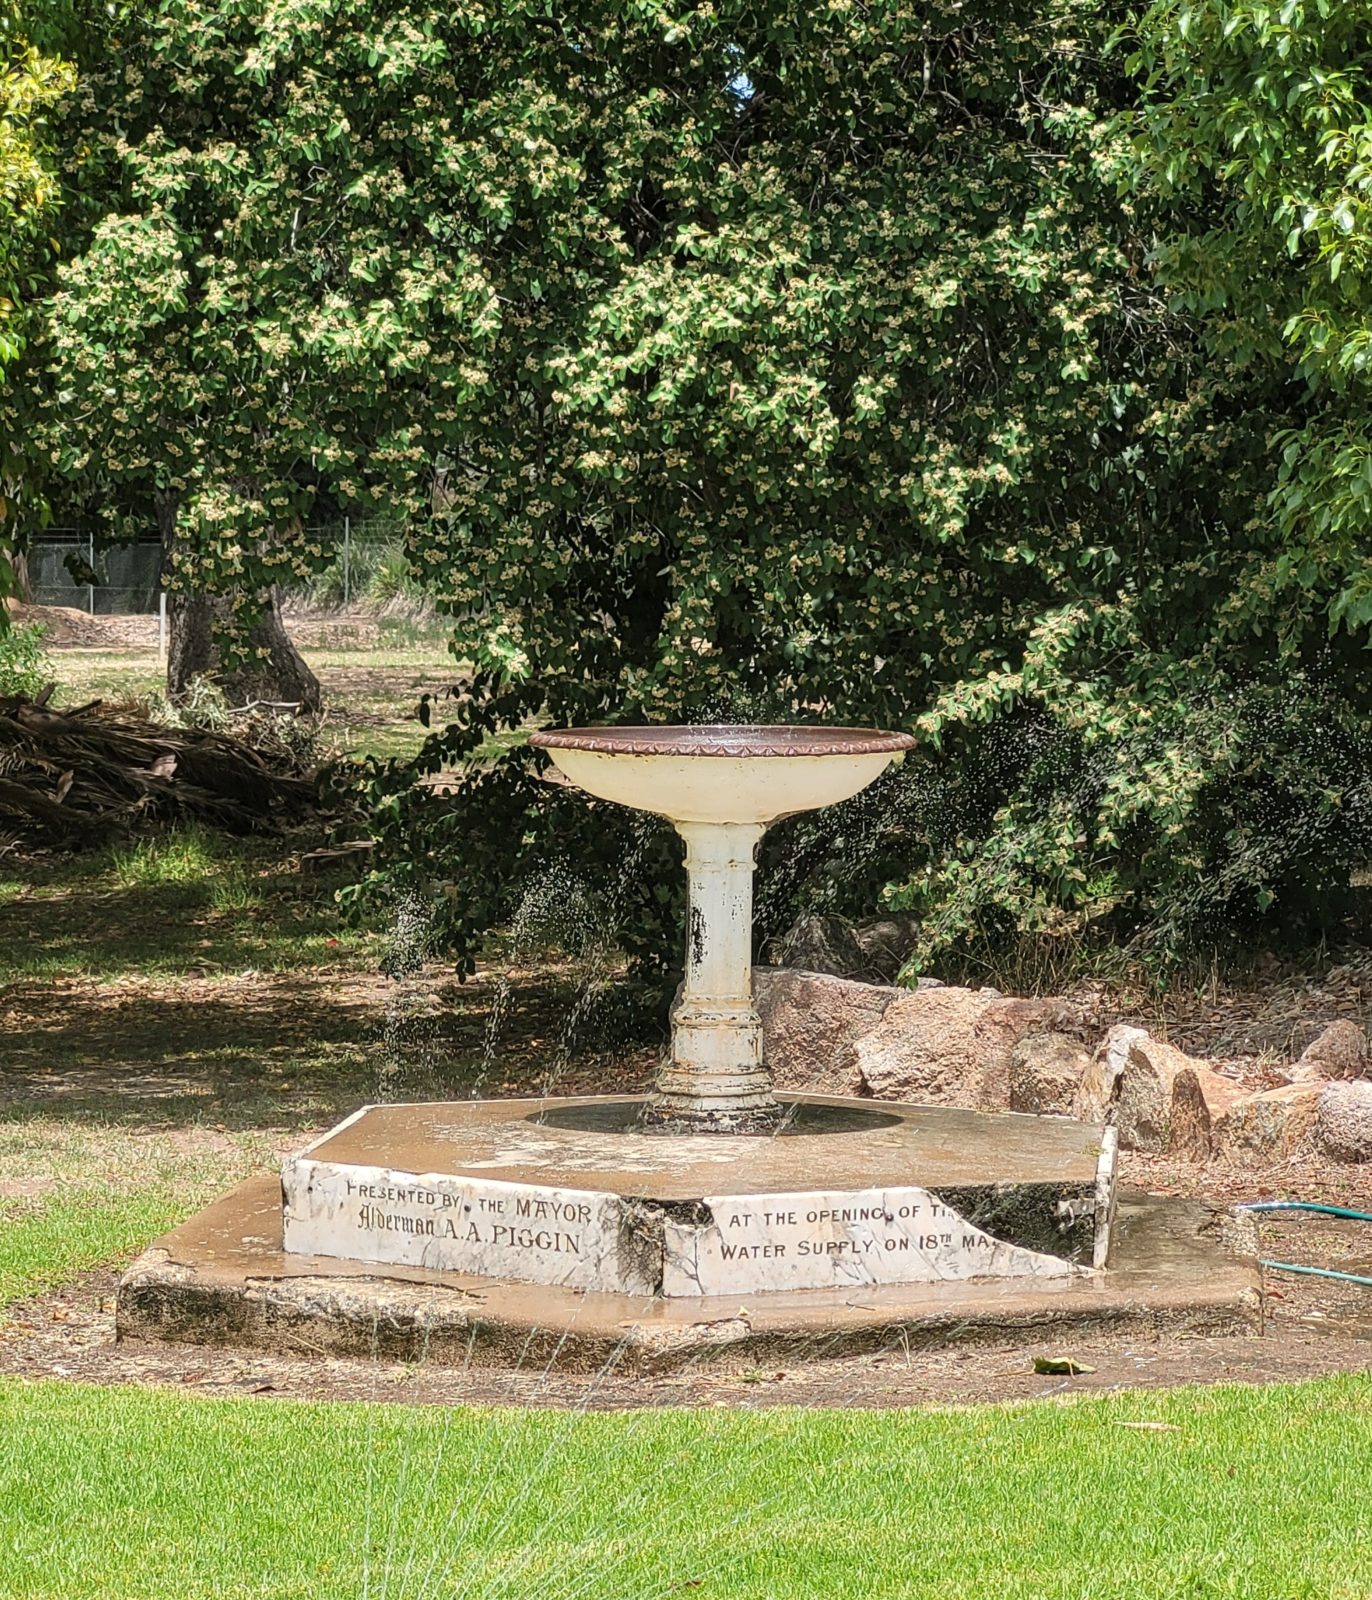 Old concrete water fountain ow located at BallPark Caravan park